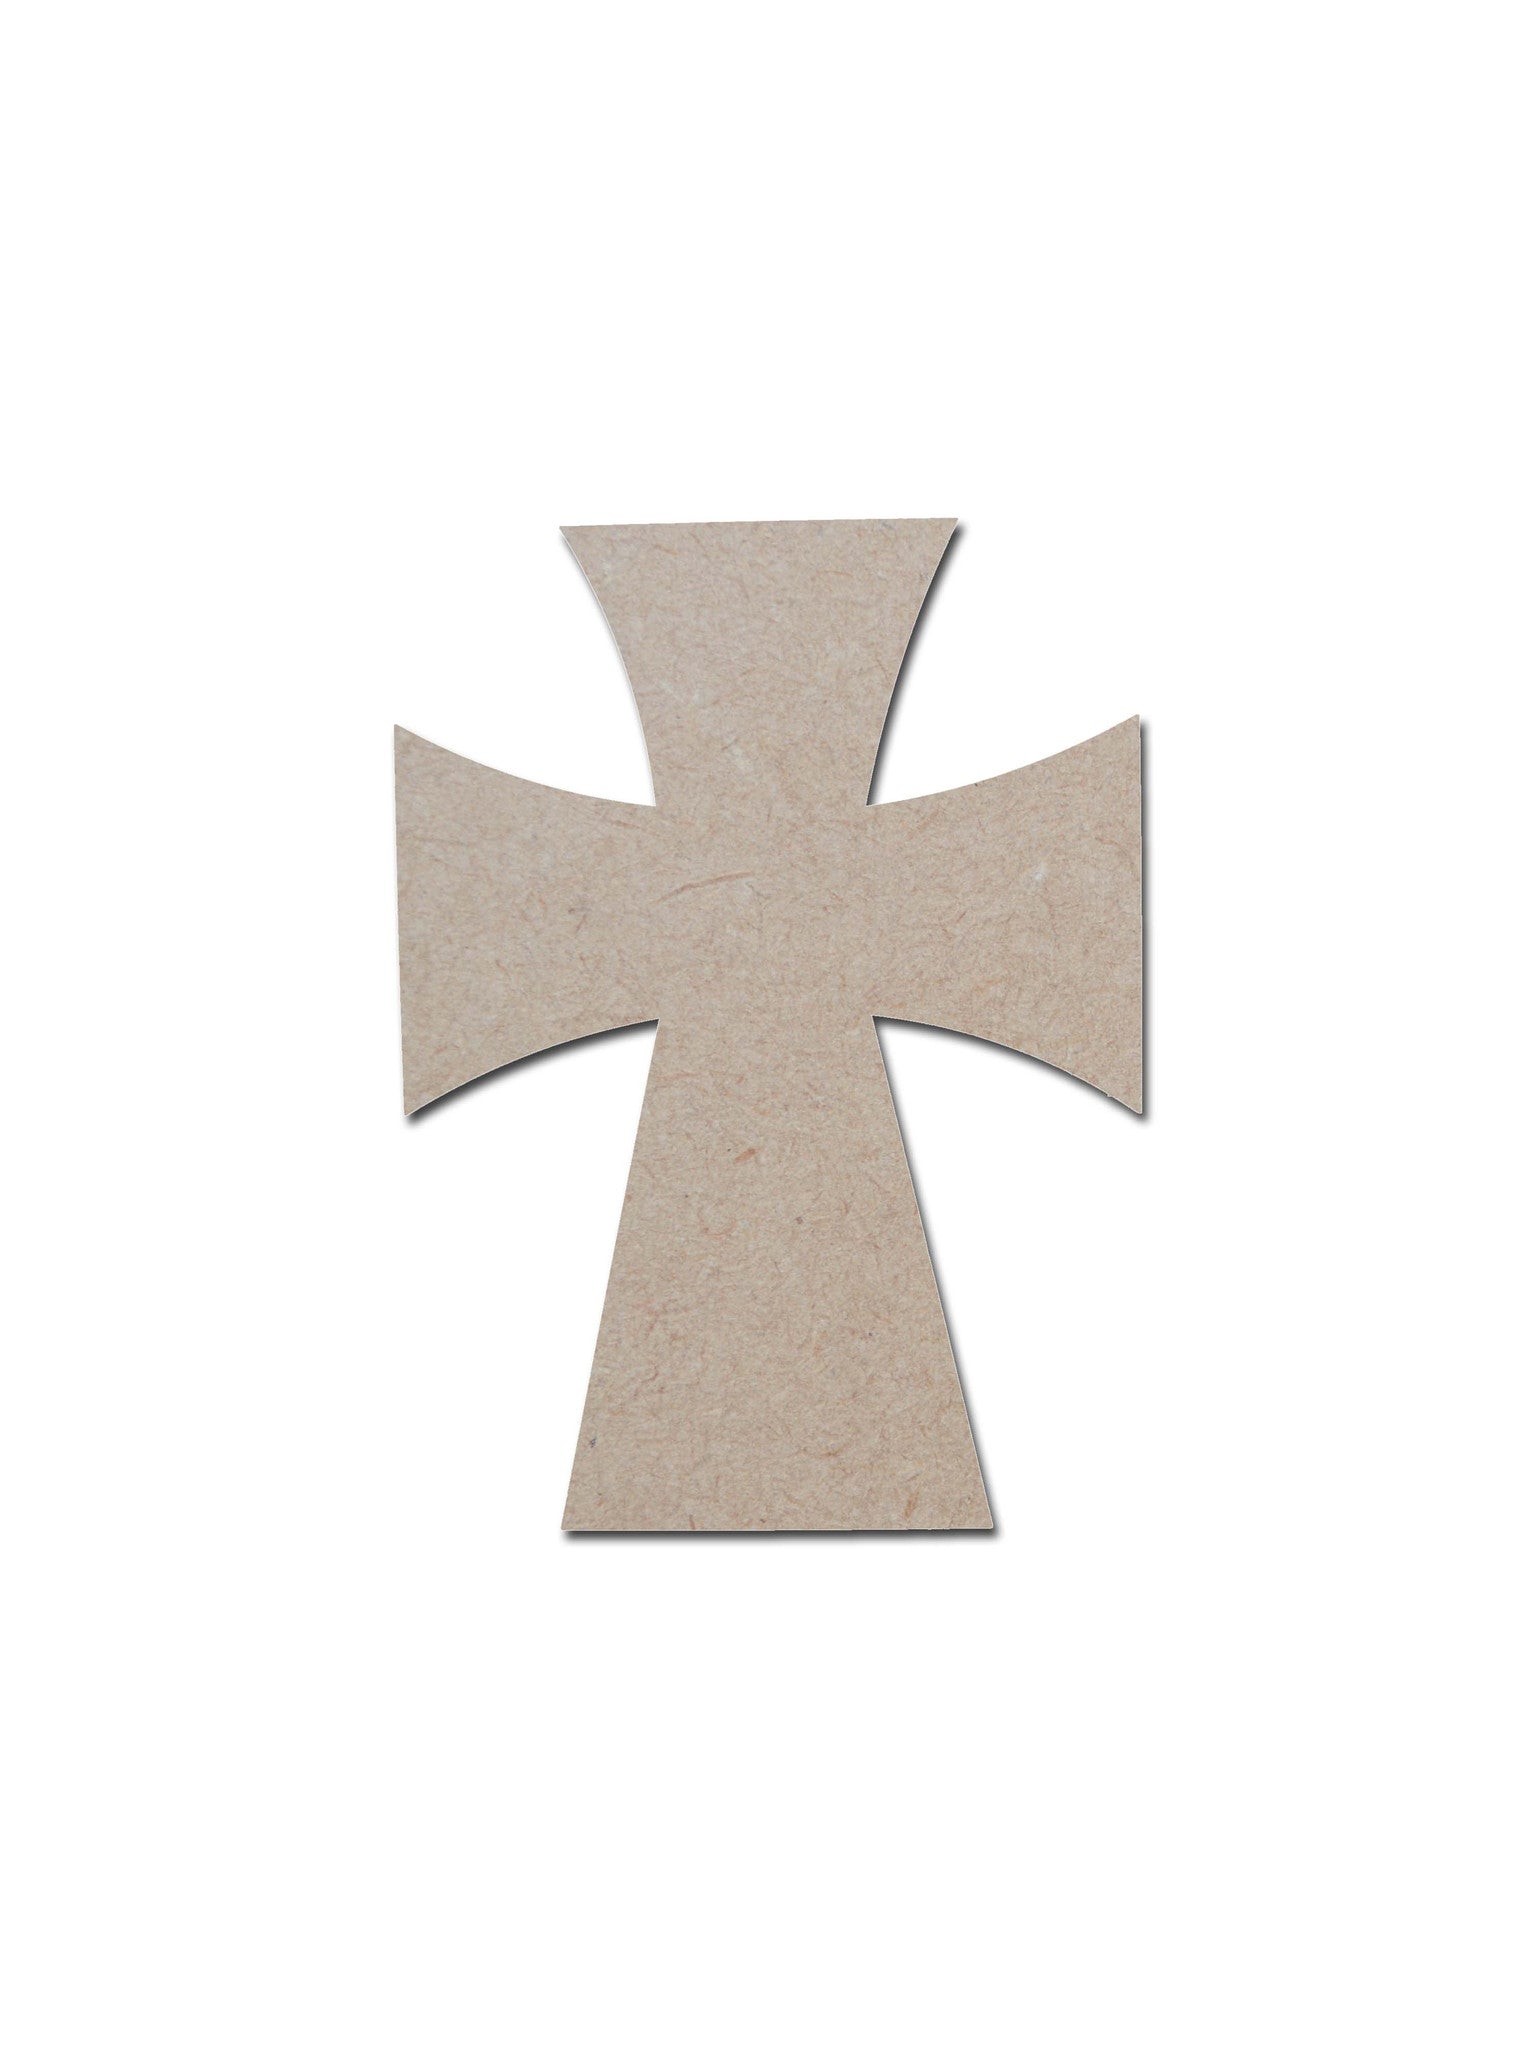 Unfinished Wood Cross MDF Craft Crosses Variety of Sizes 